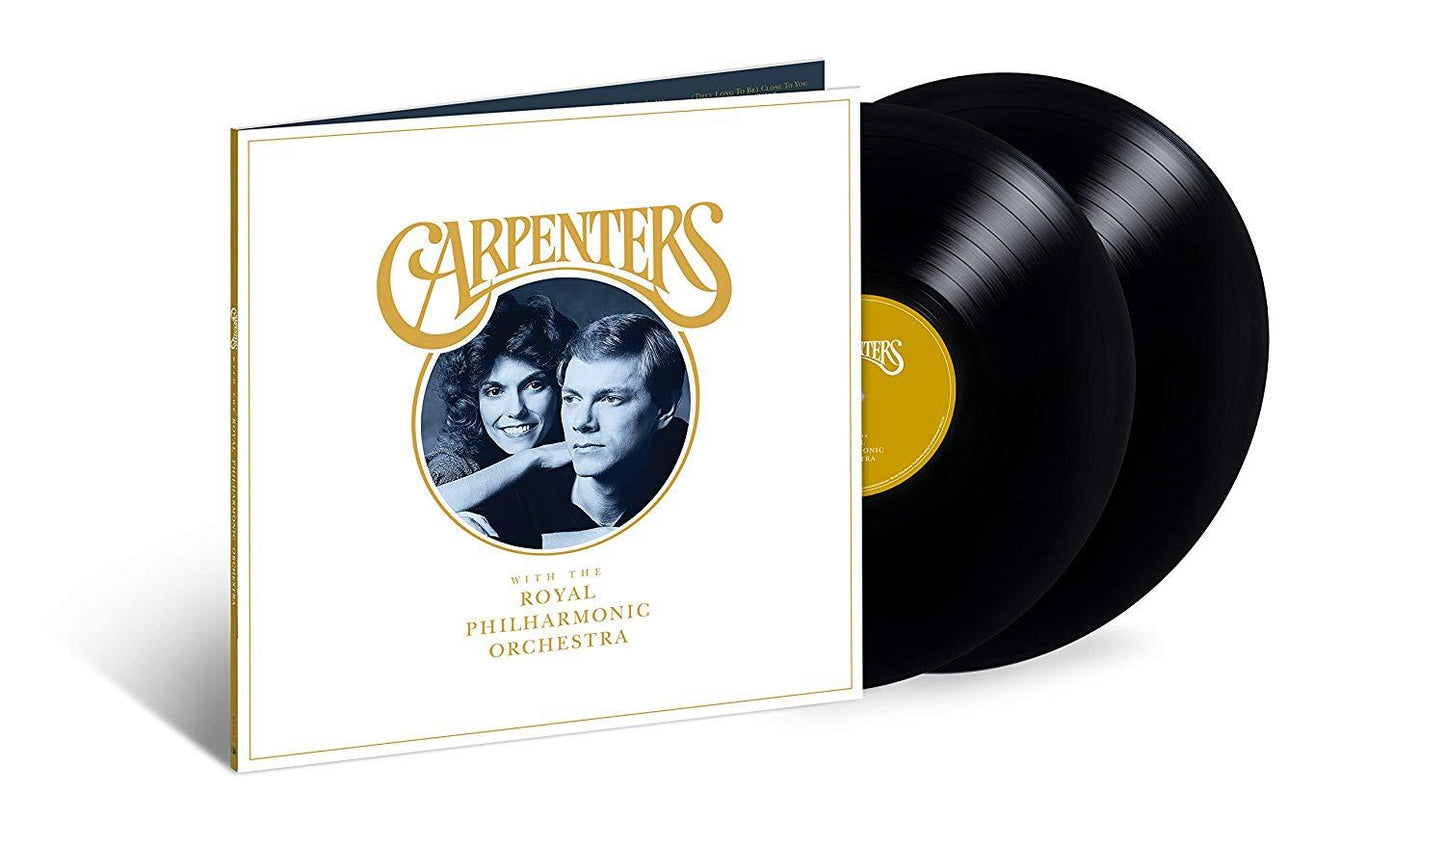 Carpenters With The Royal Philharmonic Orchestra [2 LP]